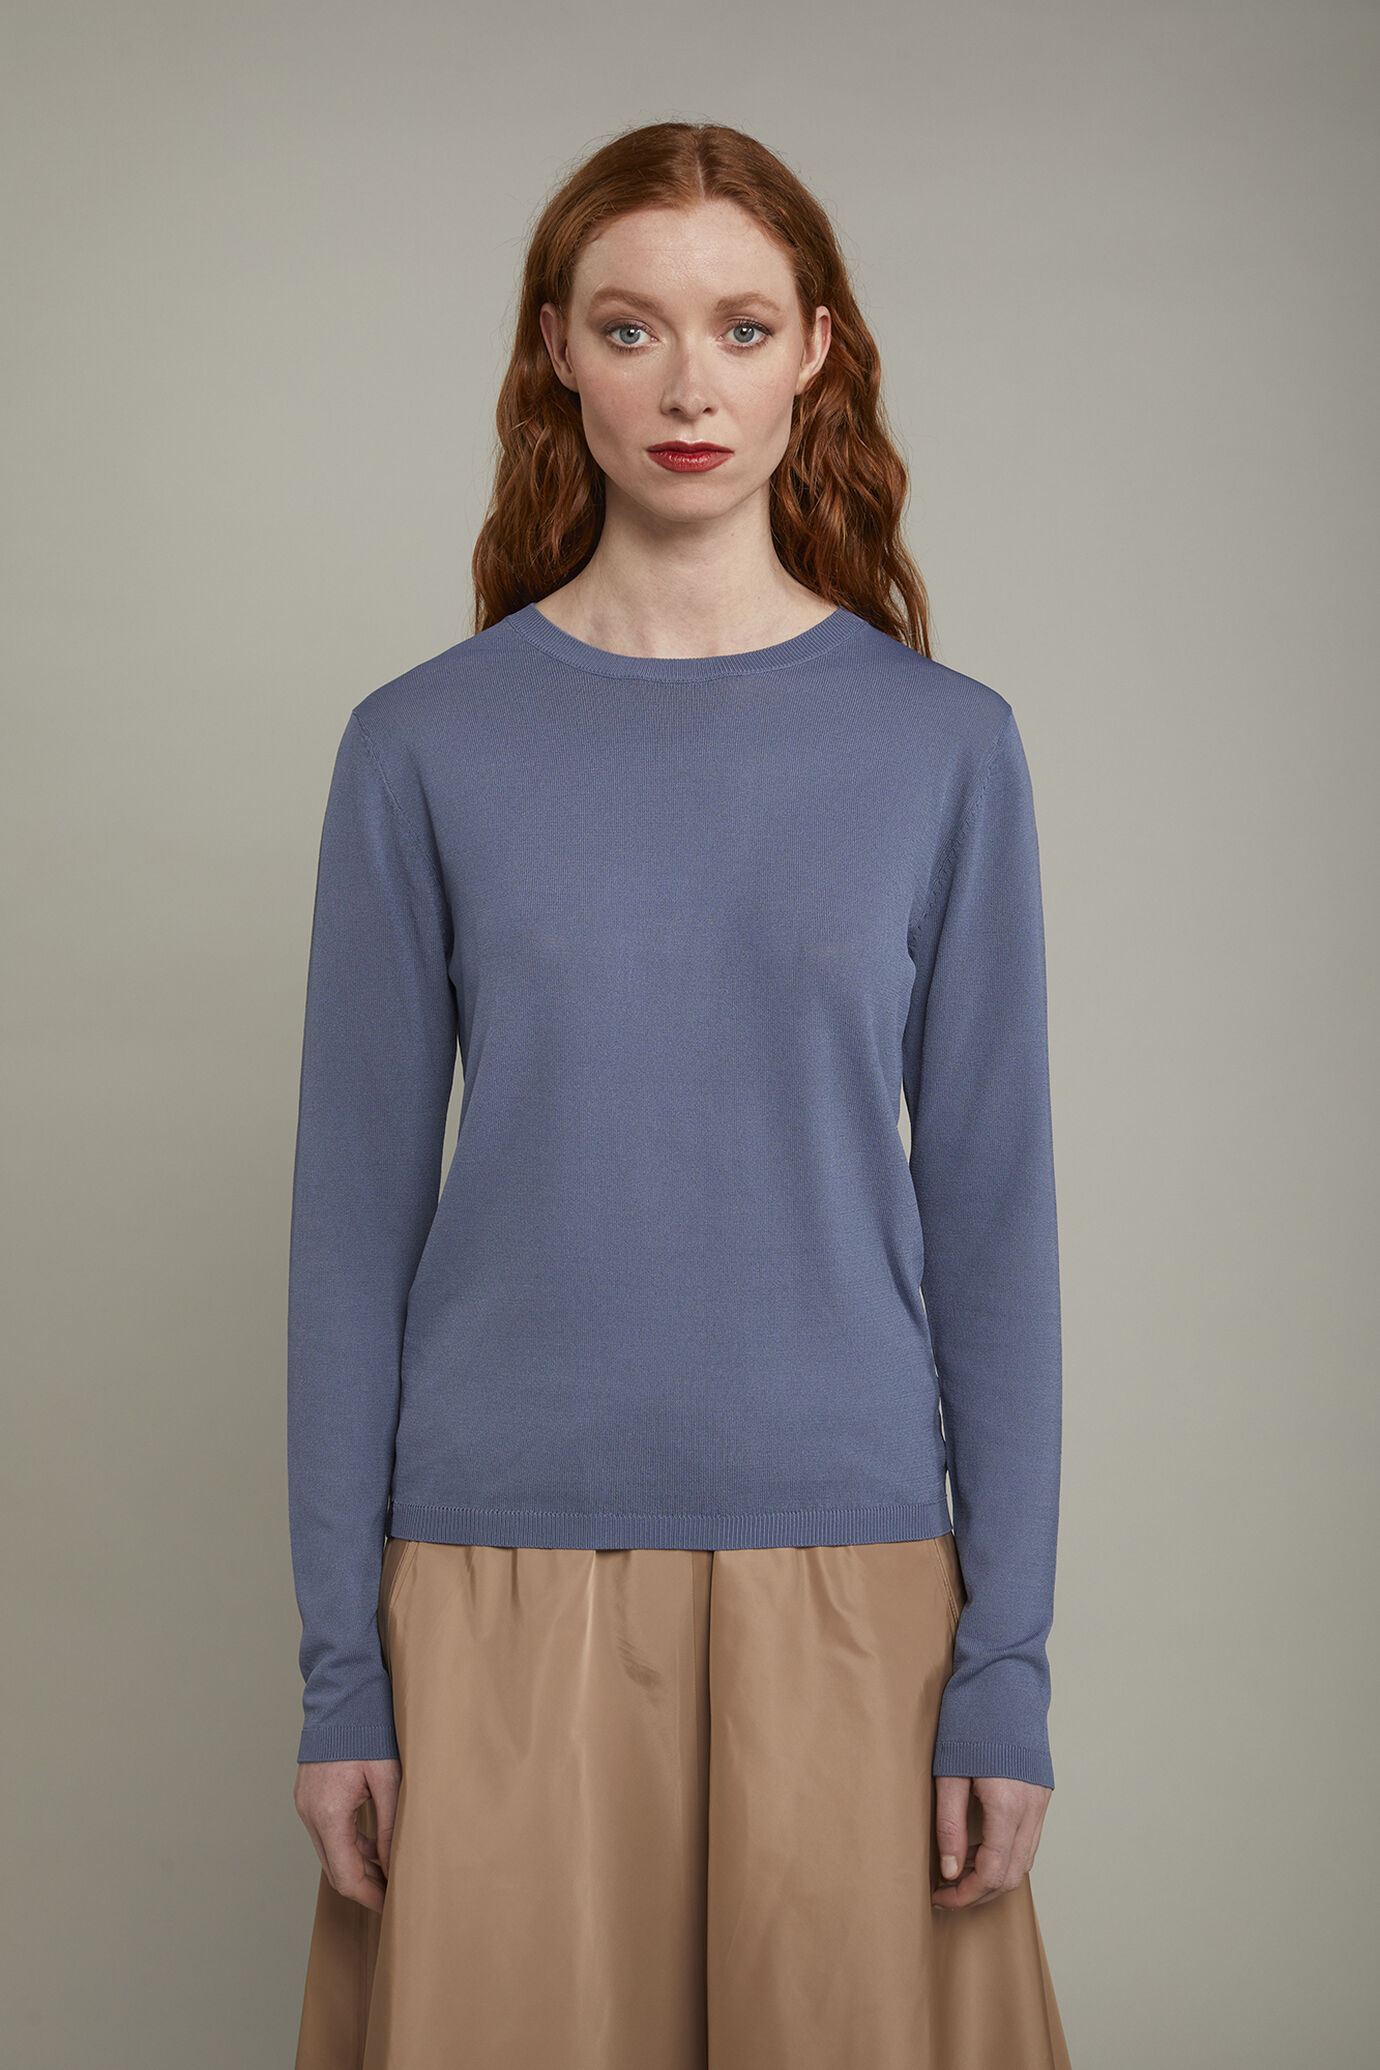 Women’s round neck sweater regular fit image number 2